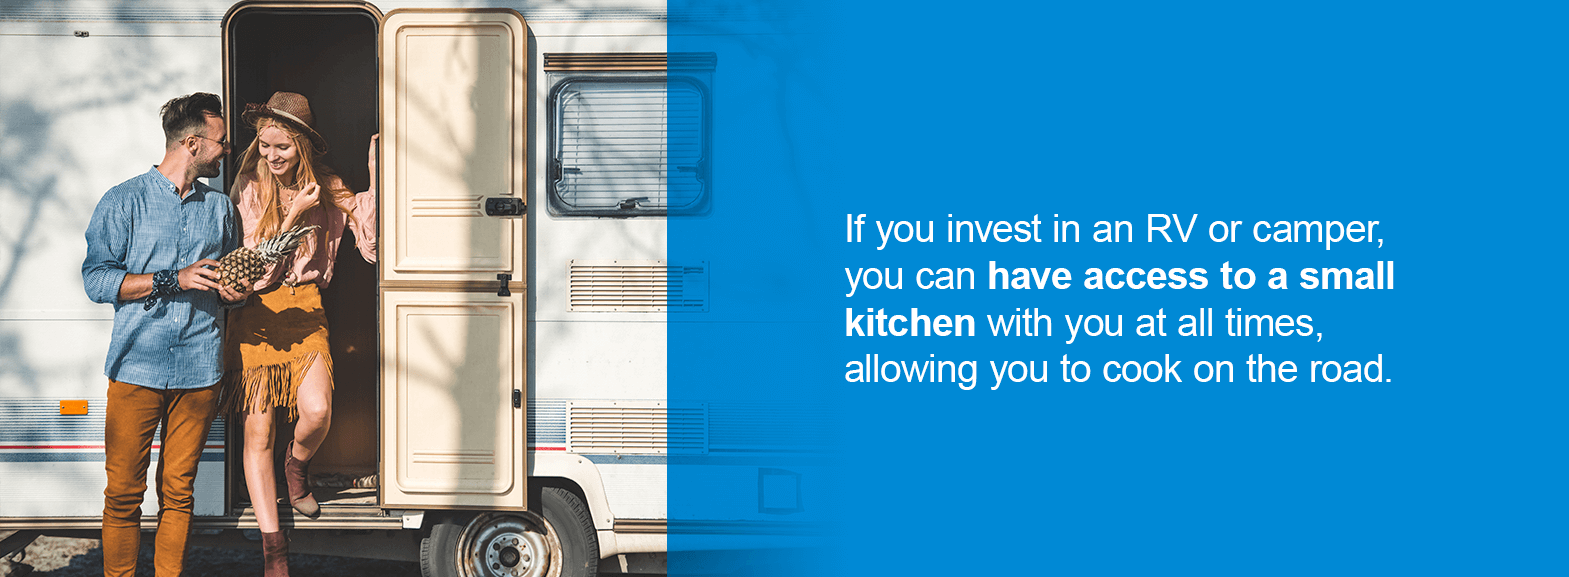 If you invest in an RV or camper, you can have access to a small kitchen with you at all times, allowing you to cook on the road.